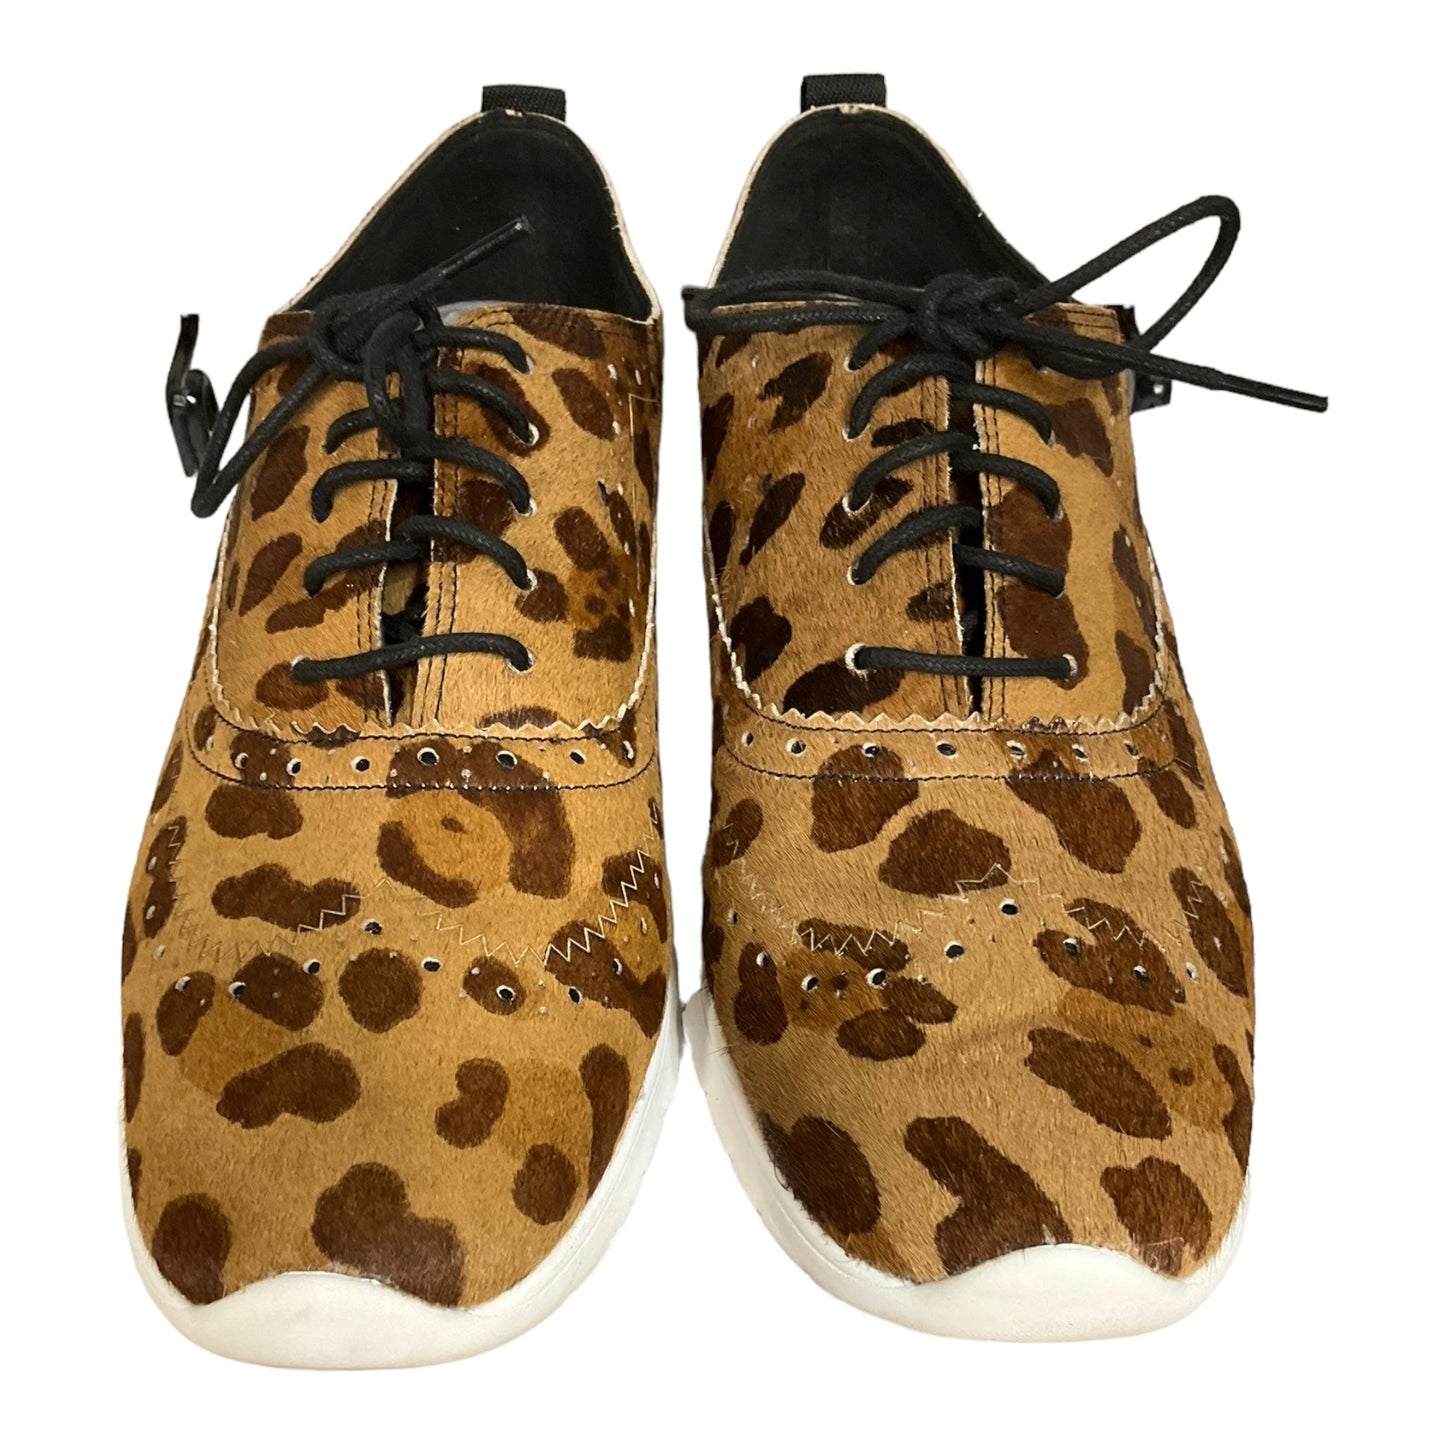 Animal Print Shoes Sneakers Cole-haan, Size 9